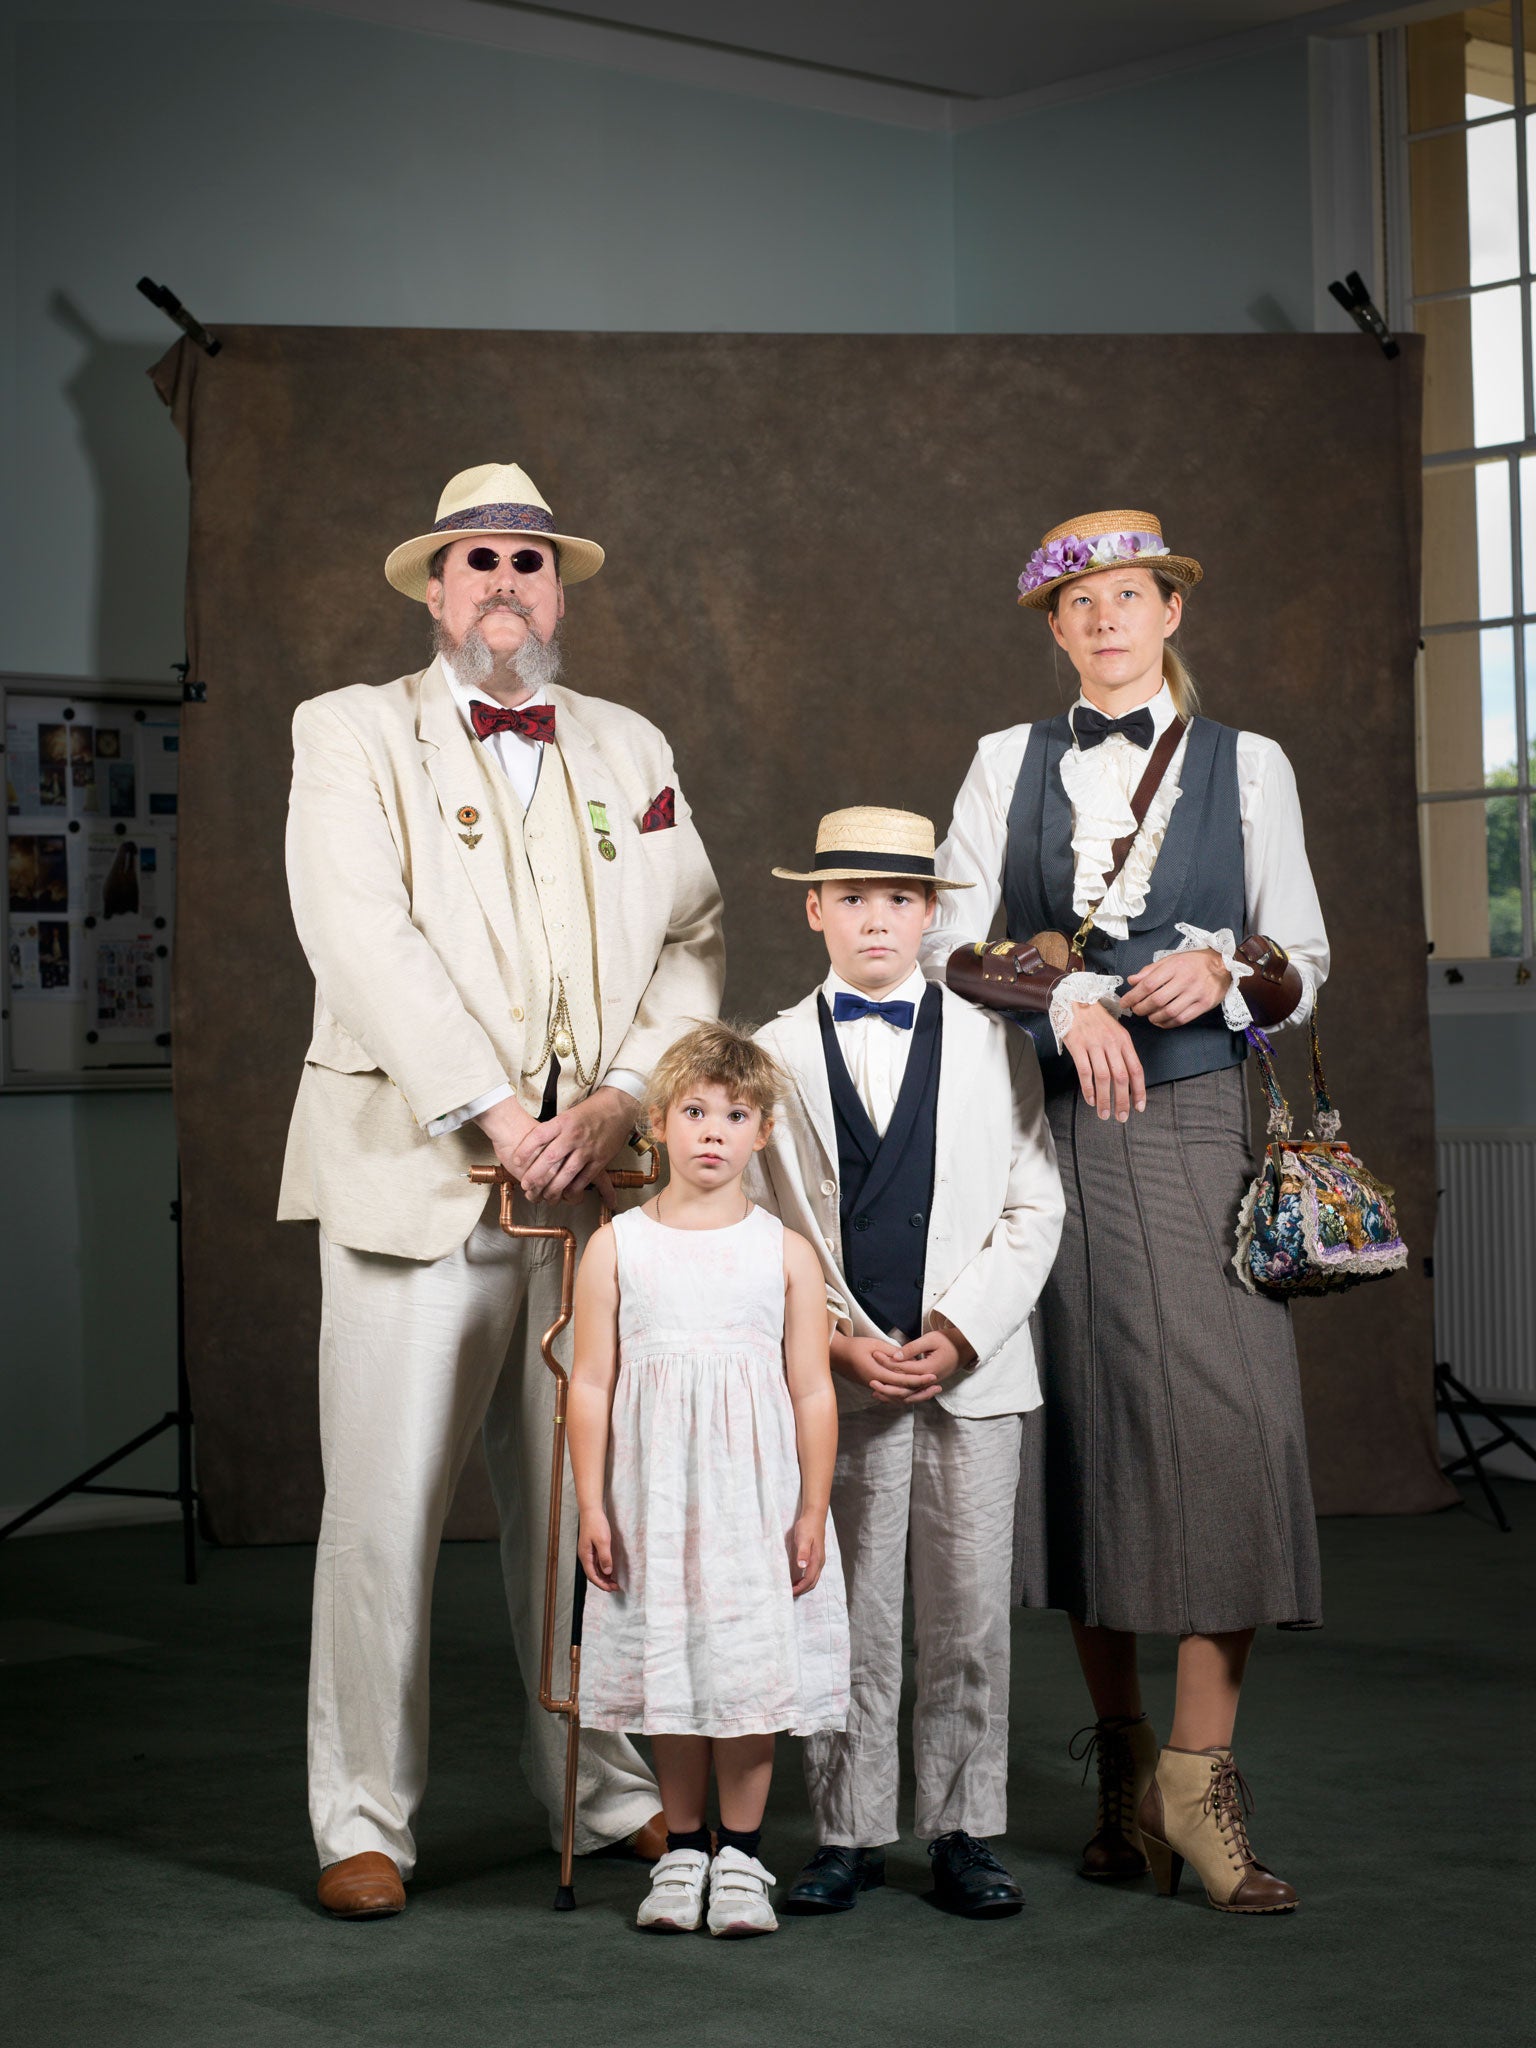 Nuclear family: Stephen Woollard and Vikki Thomas with their children Katie and Michael embody Major Tinker's 'old-fashioned manners and values'